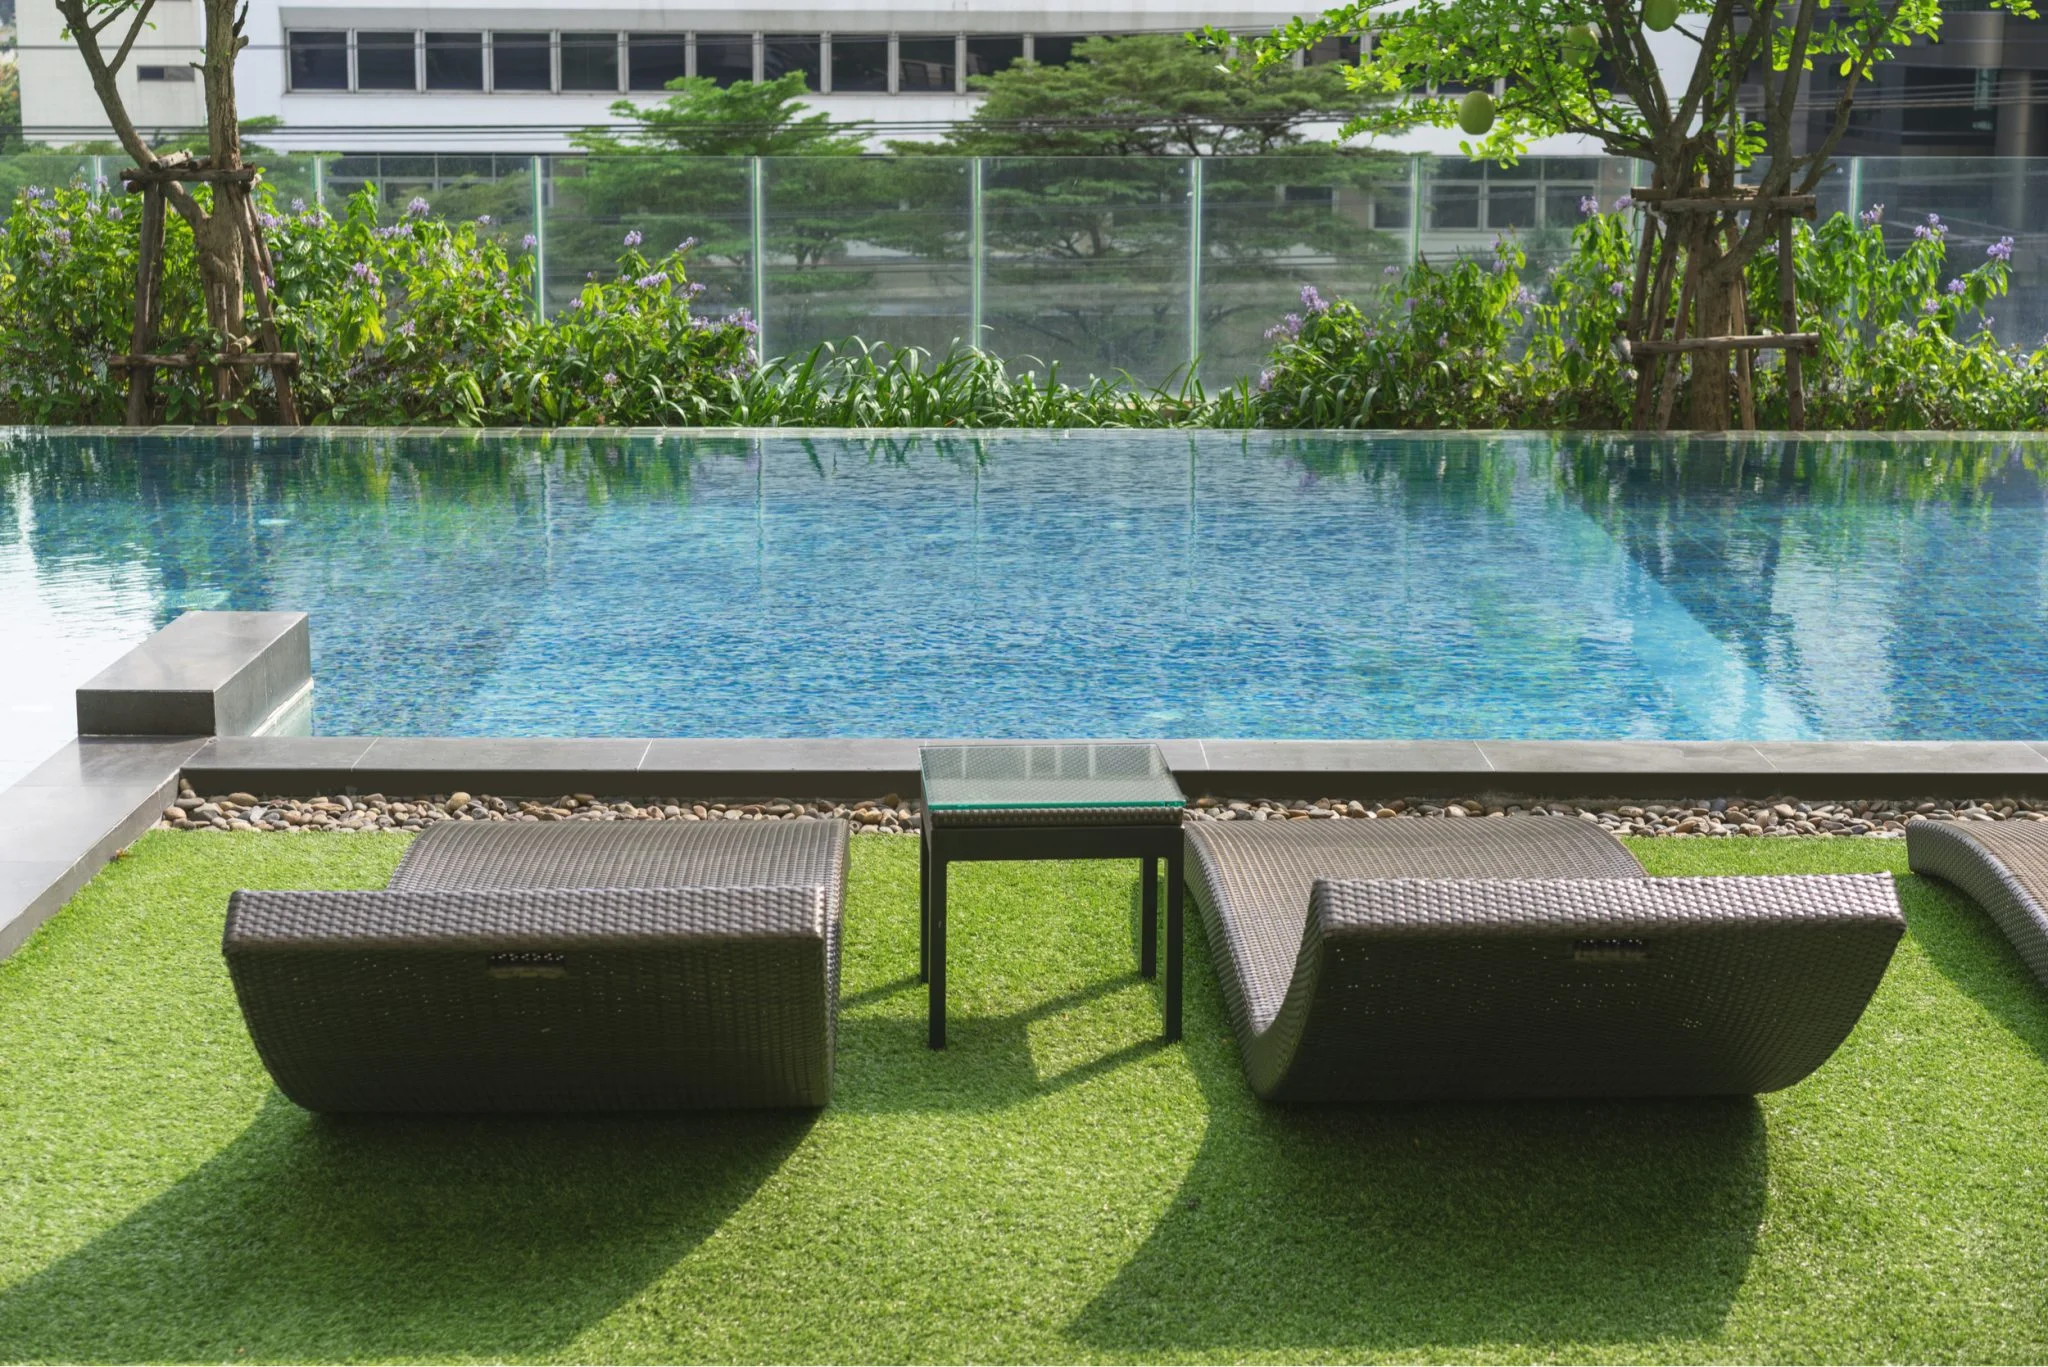 Advantages of Artificial Grass Around the Pool Area